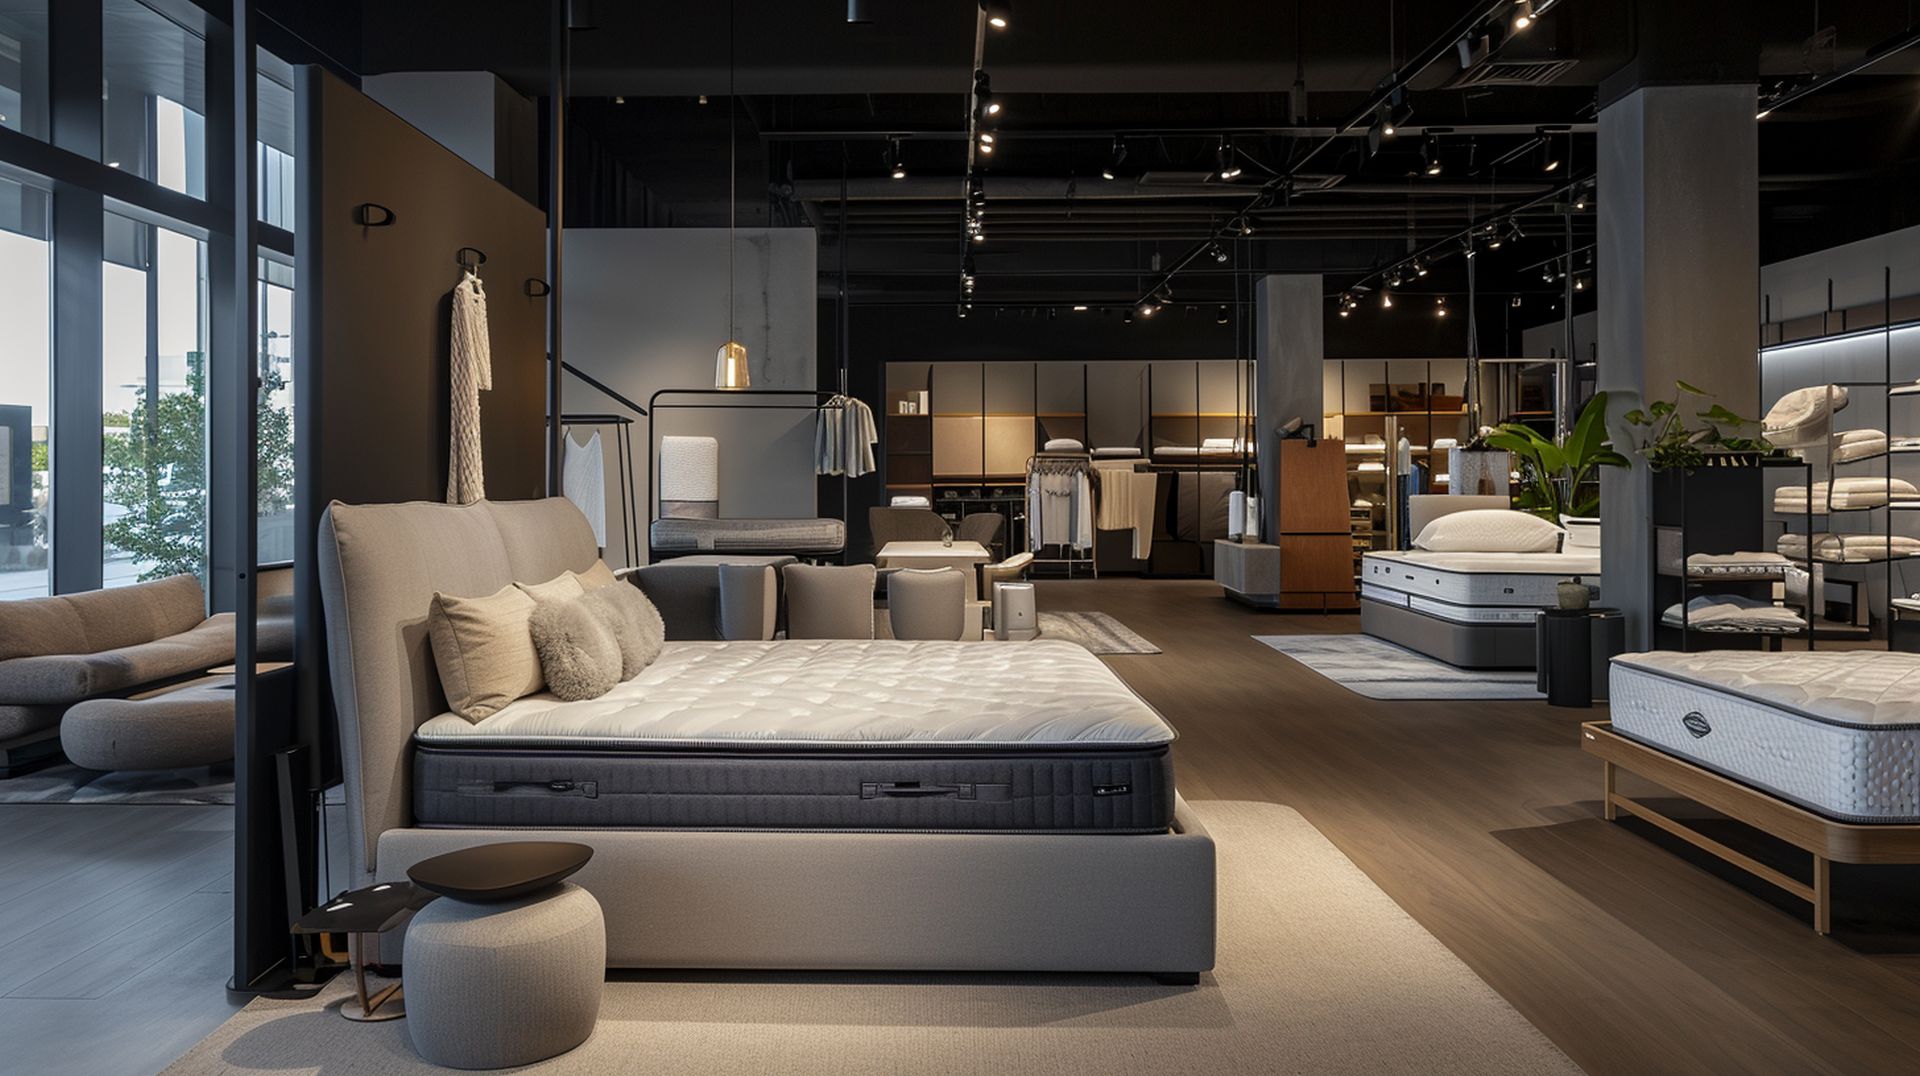 If you're looking for a new bed, mattress stores in Kent offer the best customer and delivery service, financing, and warranties in Washington